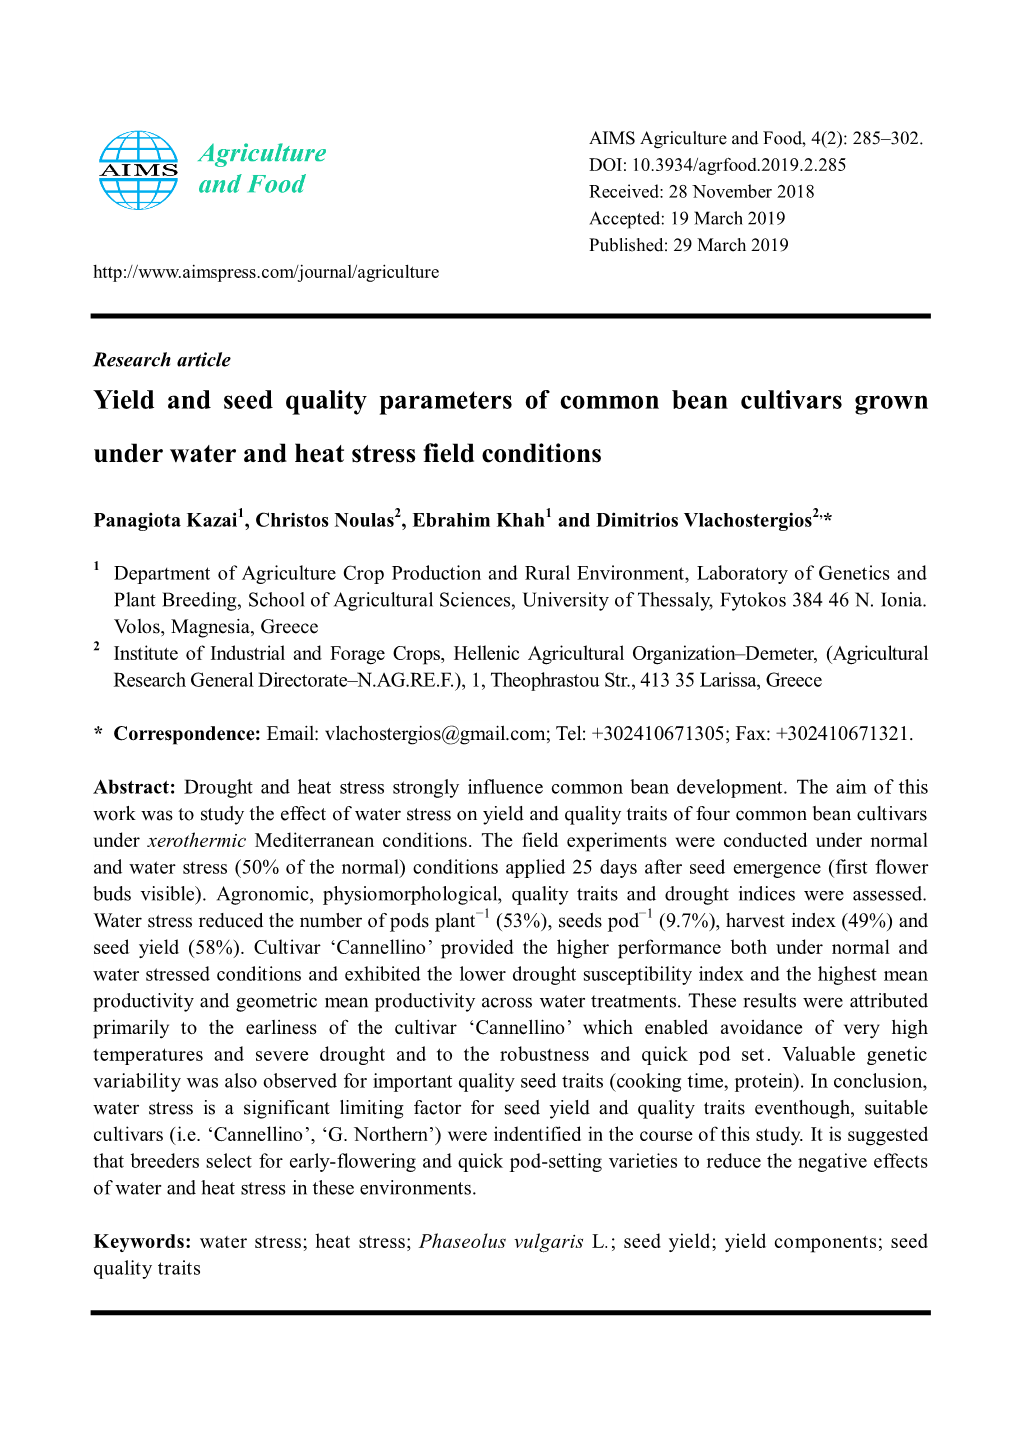 Yield and Seed Quality Parameters of Common Bean Cultivars Grown Under Water and Heat Stress Field Conditions